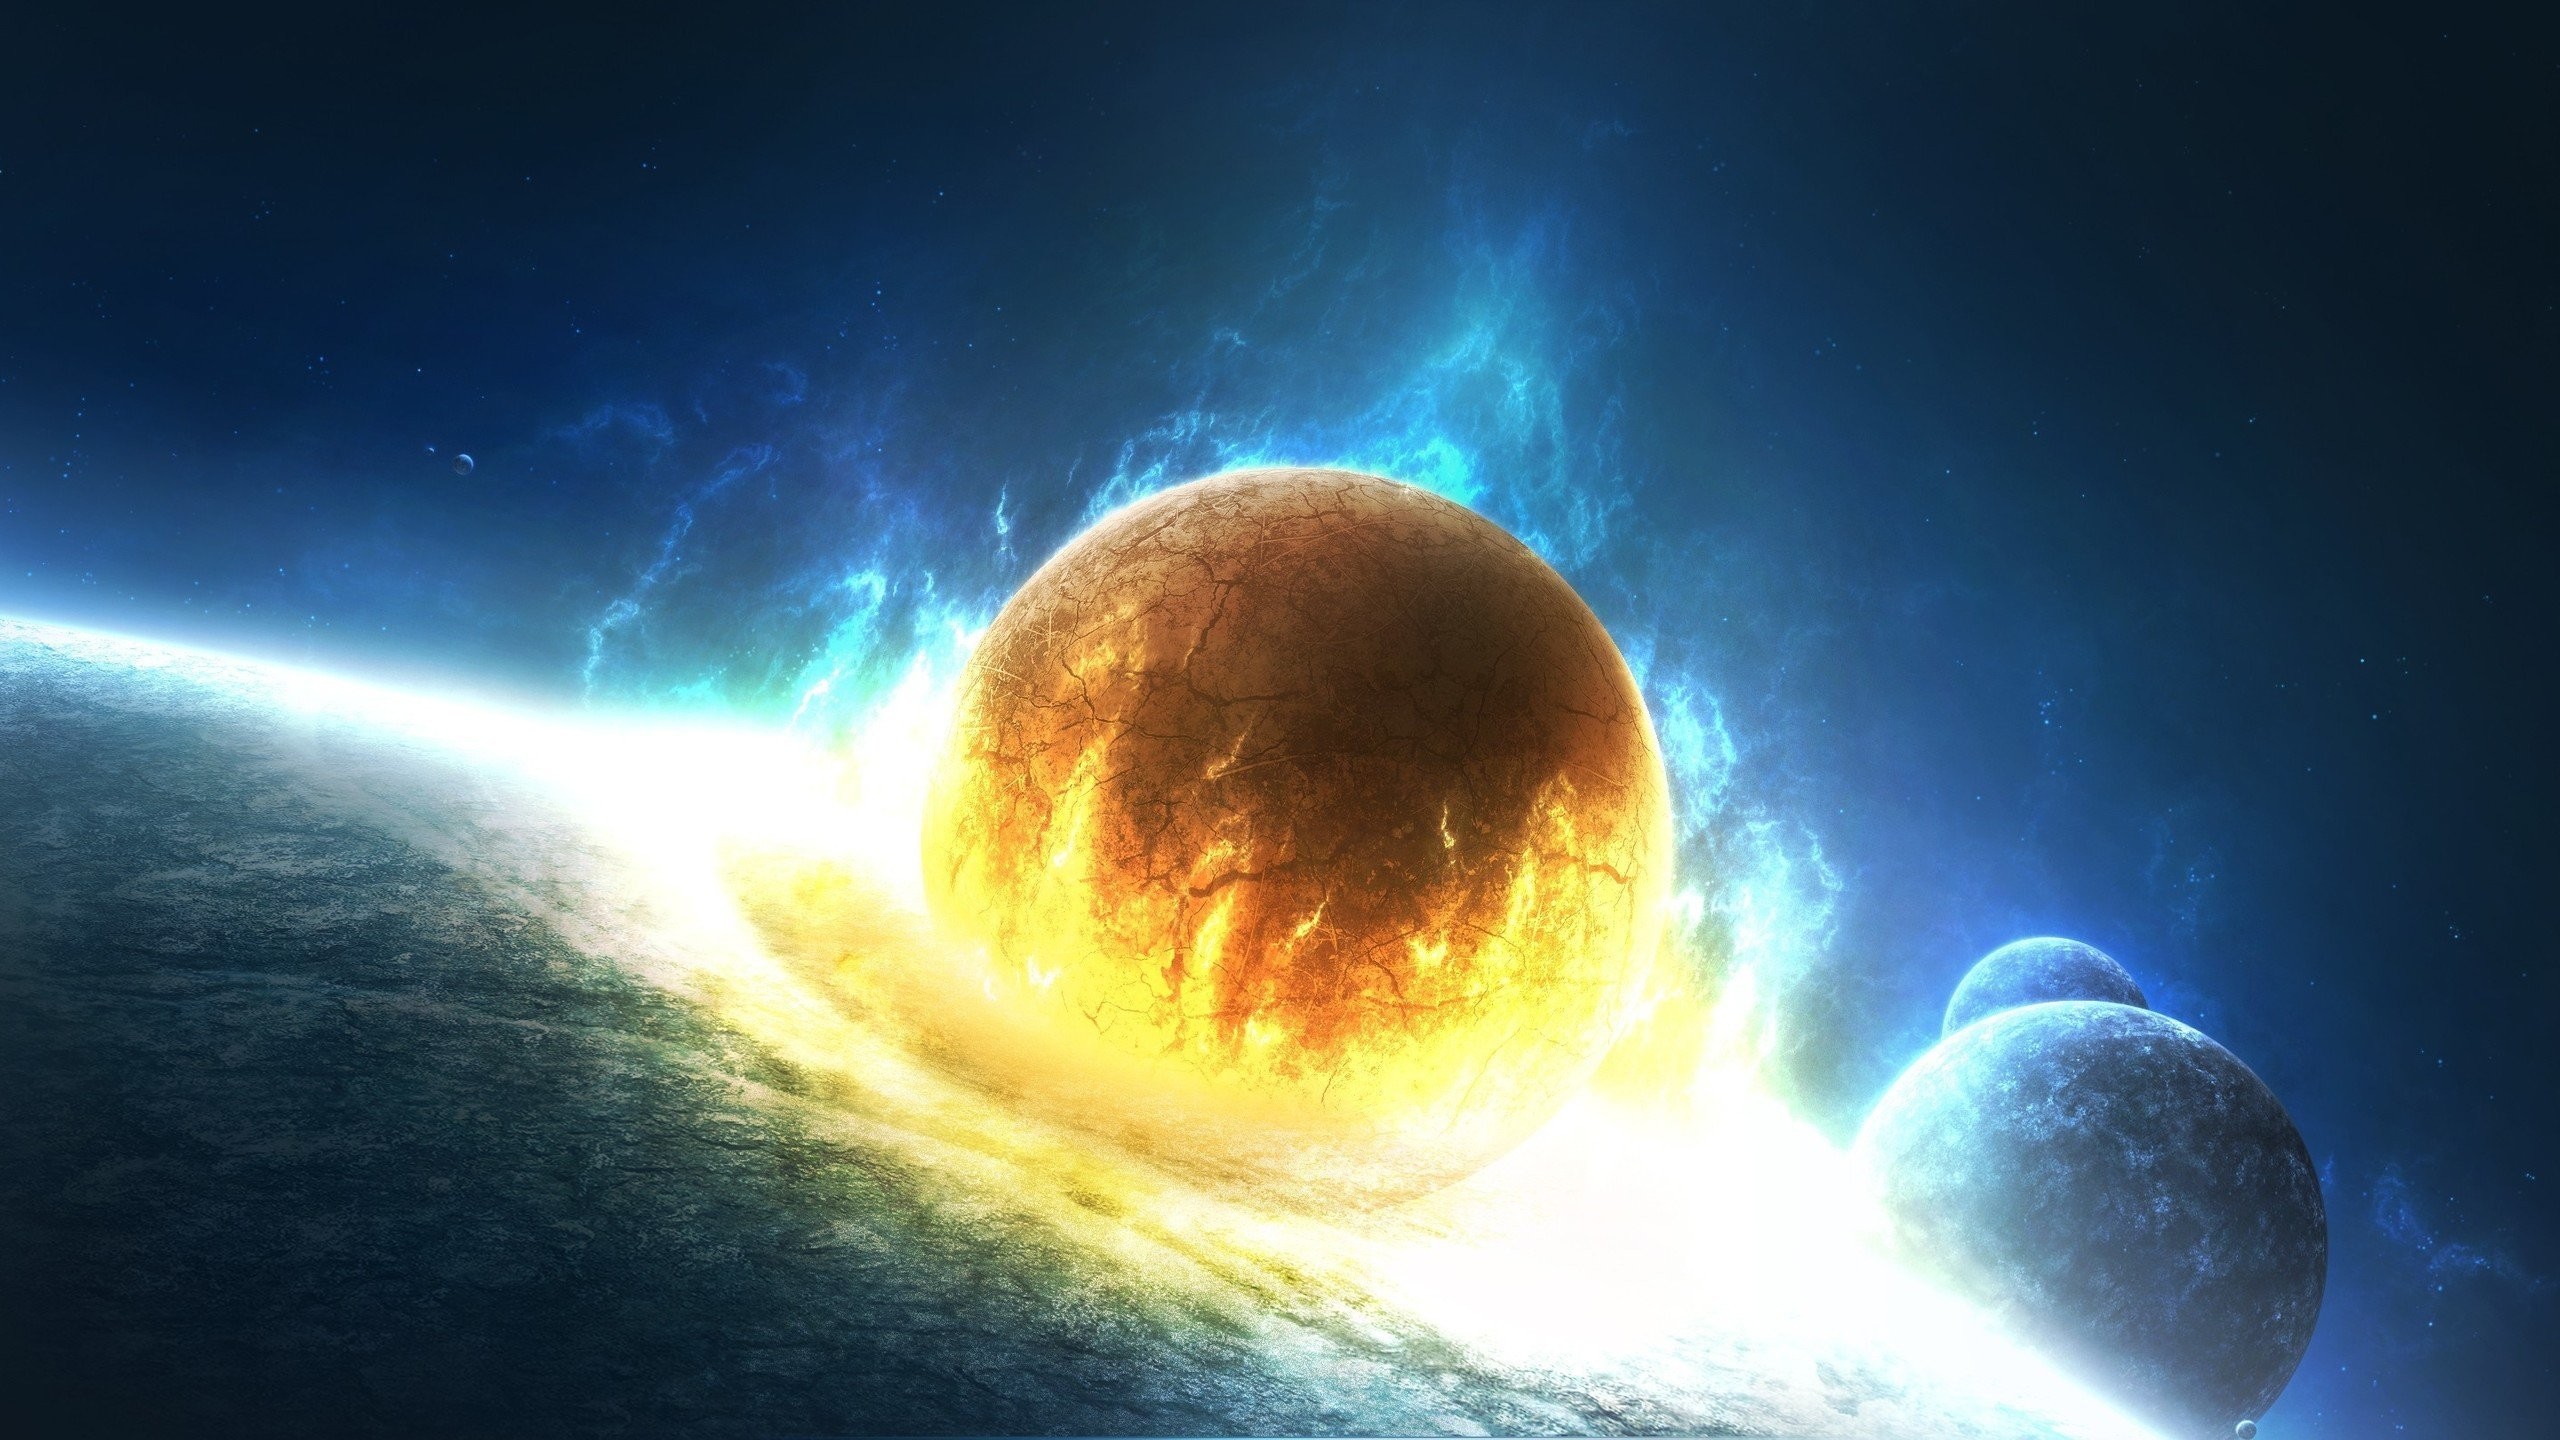 2560x1440 Outer space stars explosions planets fire Earth artwork collision wallpaper  |  | 293421 | WallpaperUP